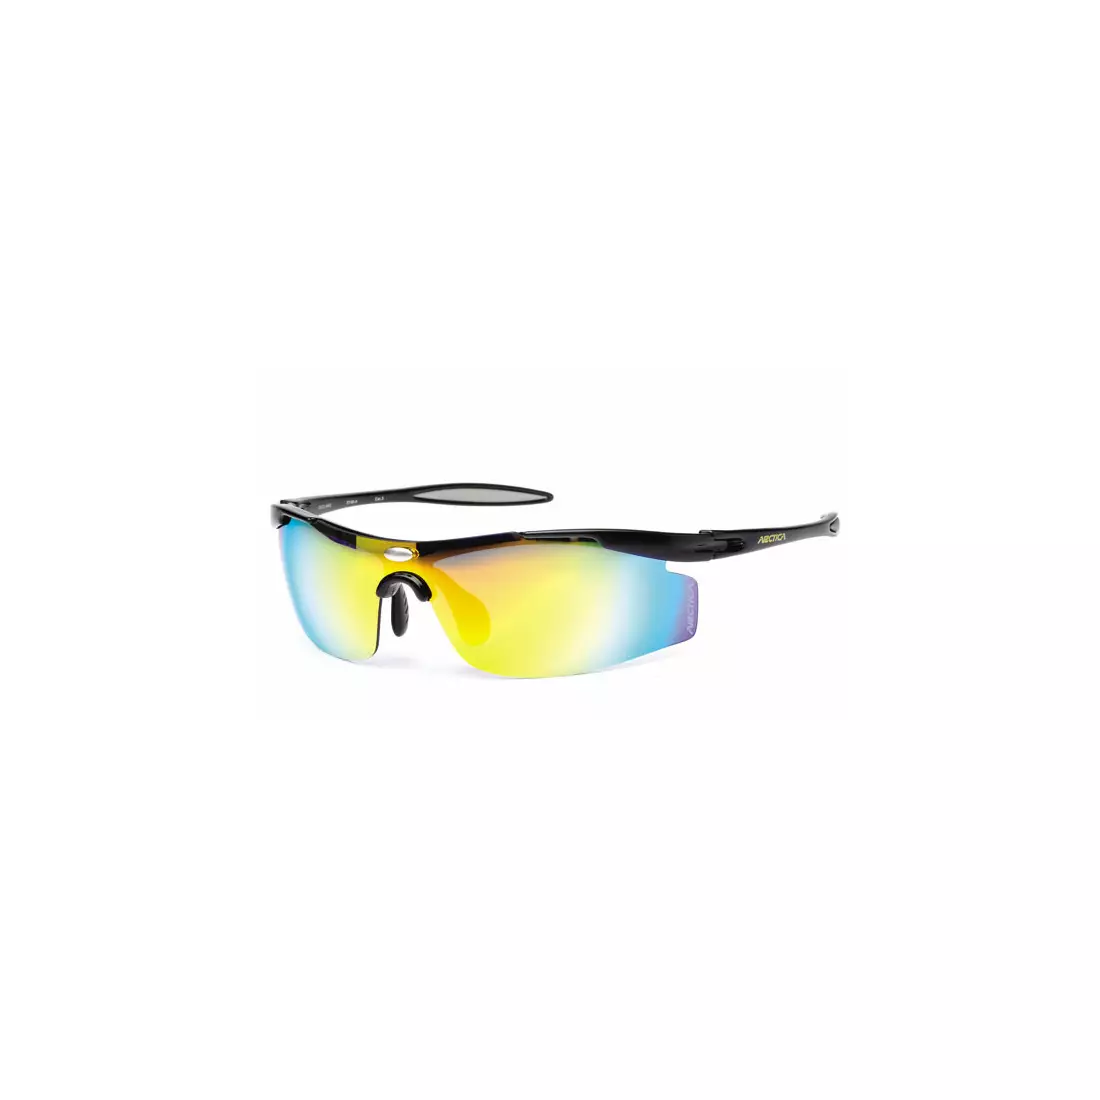 ARCTICA cycling / sports glasses, S 196A